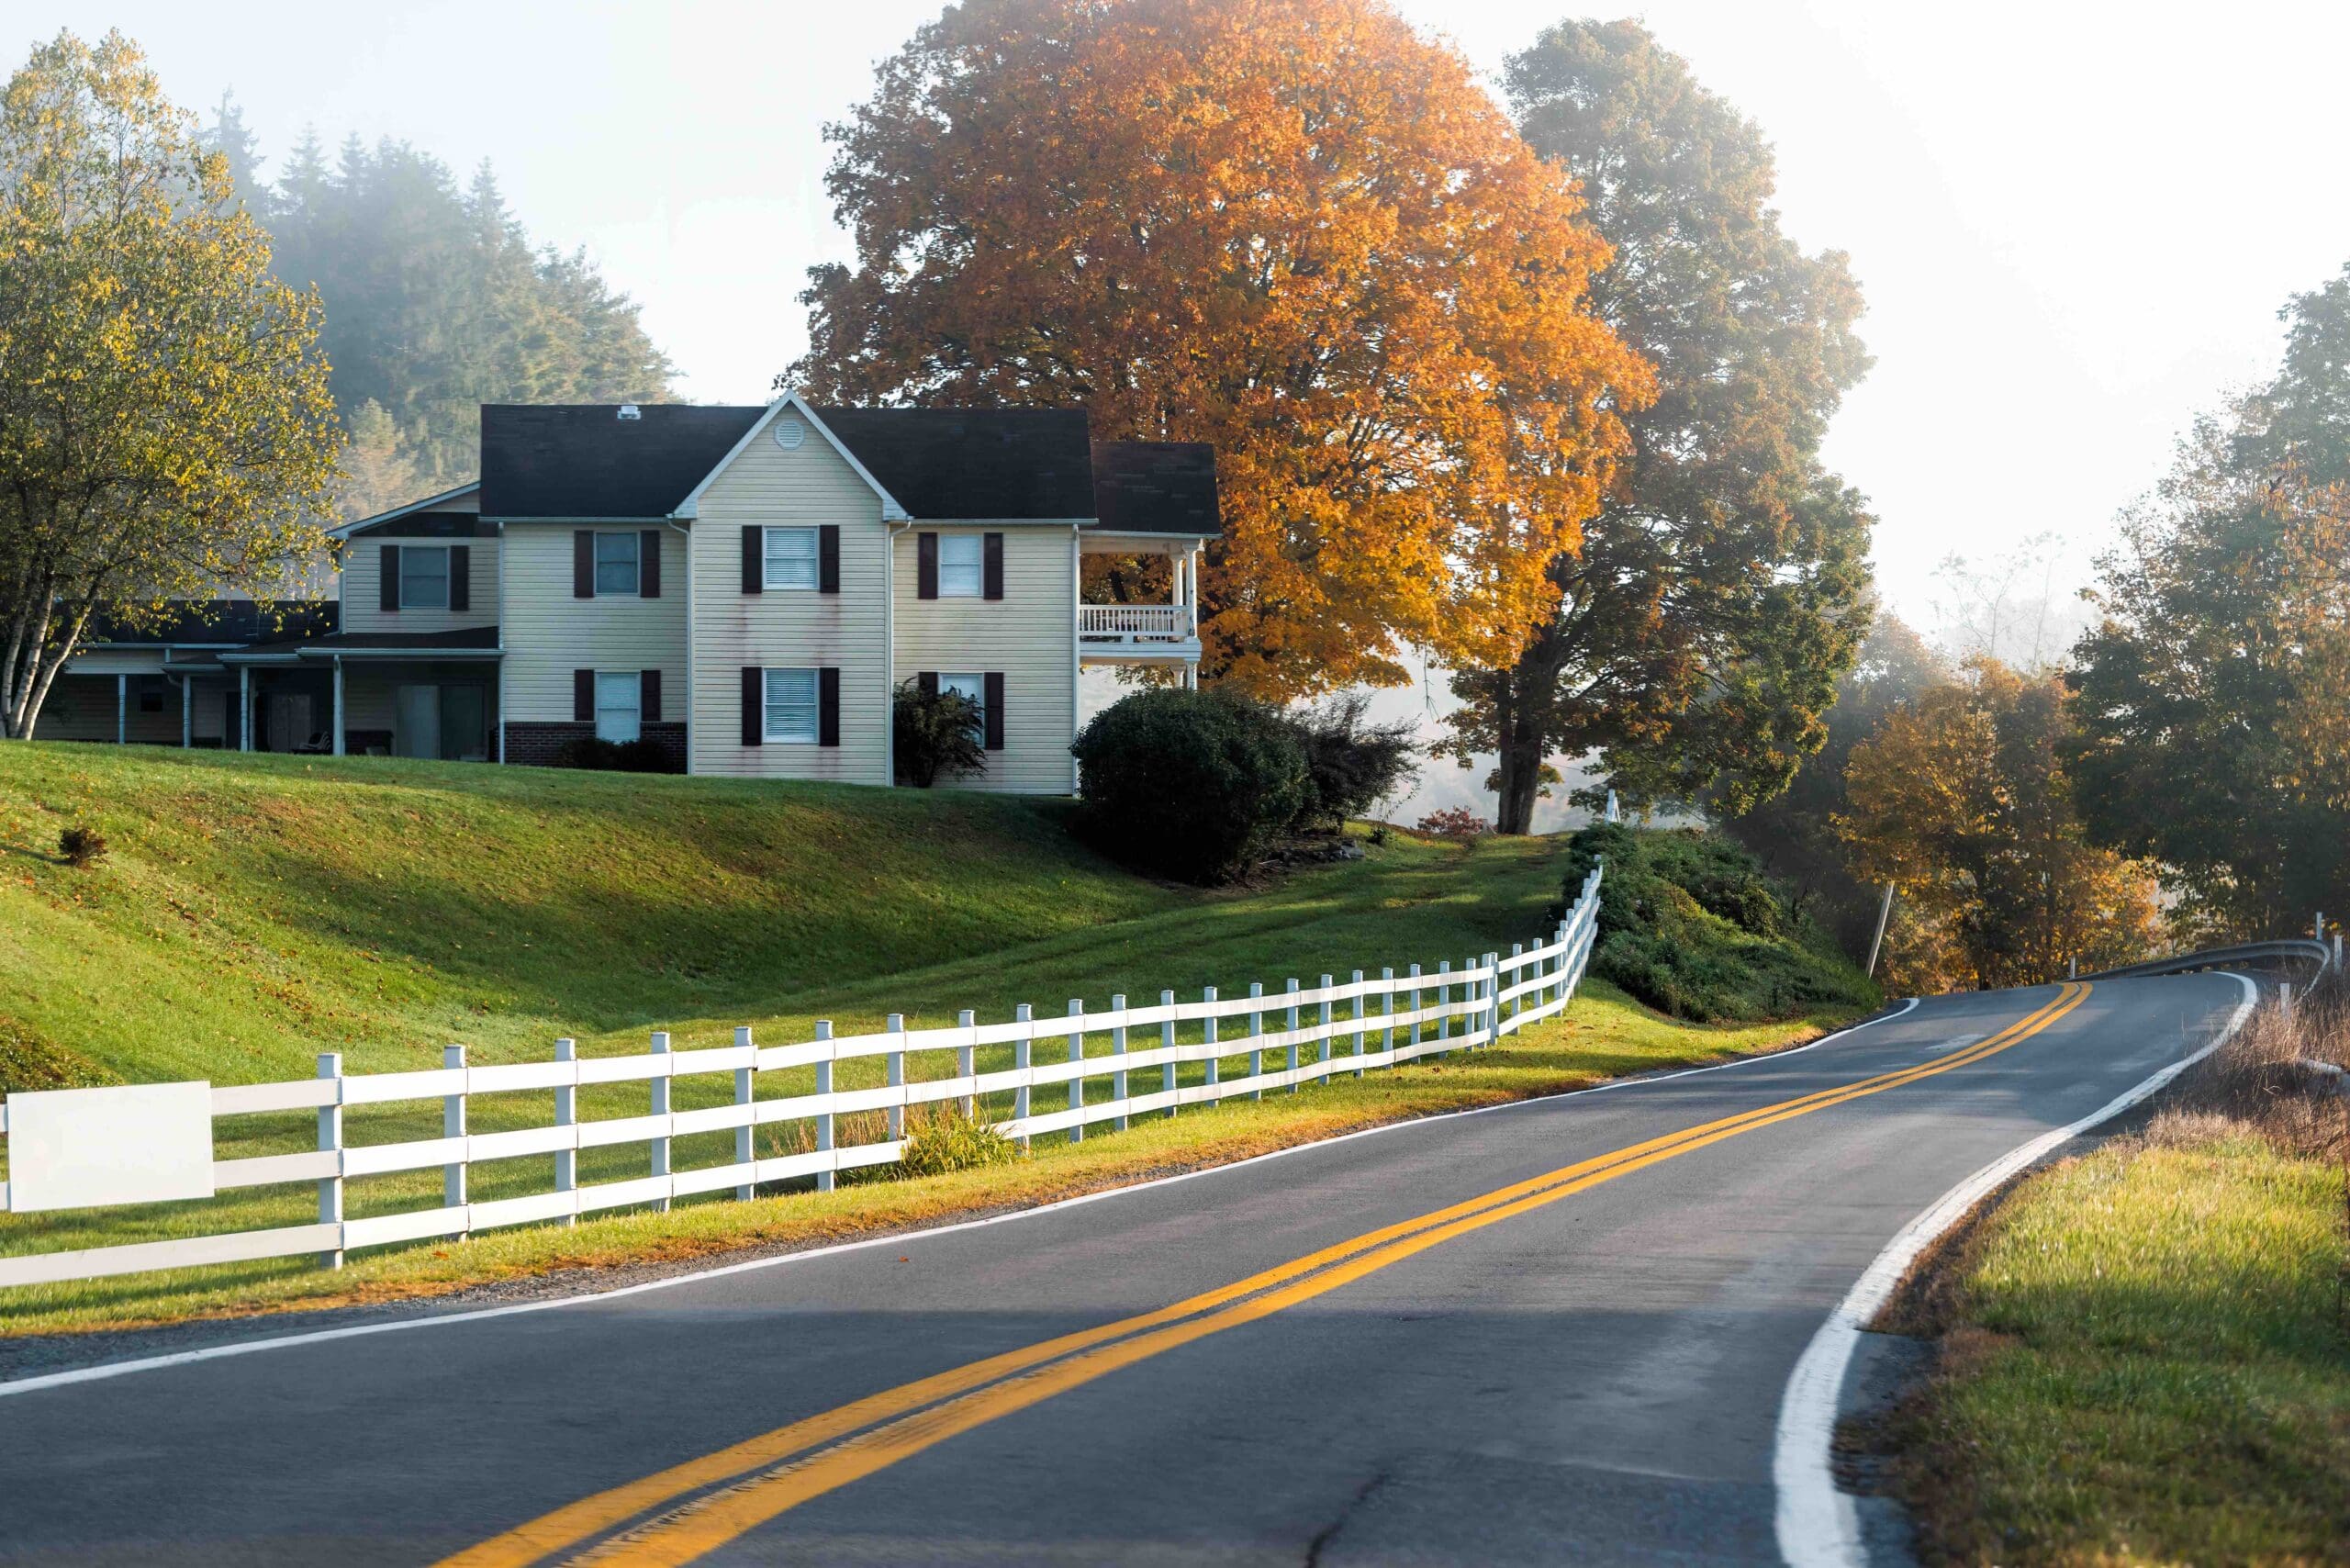 Roadside farmhouse house in countryside rural road highway in West Virginia, USA by mountain forest with colorful autumn fall trees foliage at sunrise morning